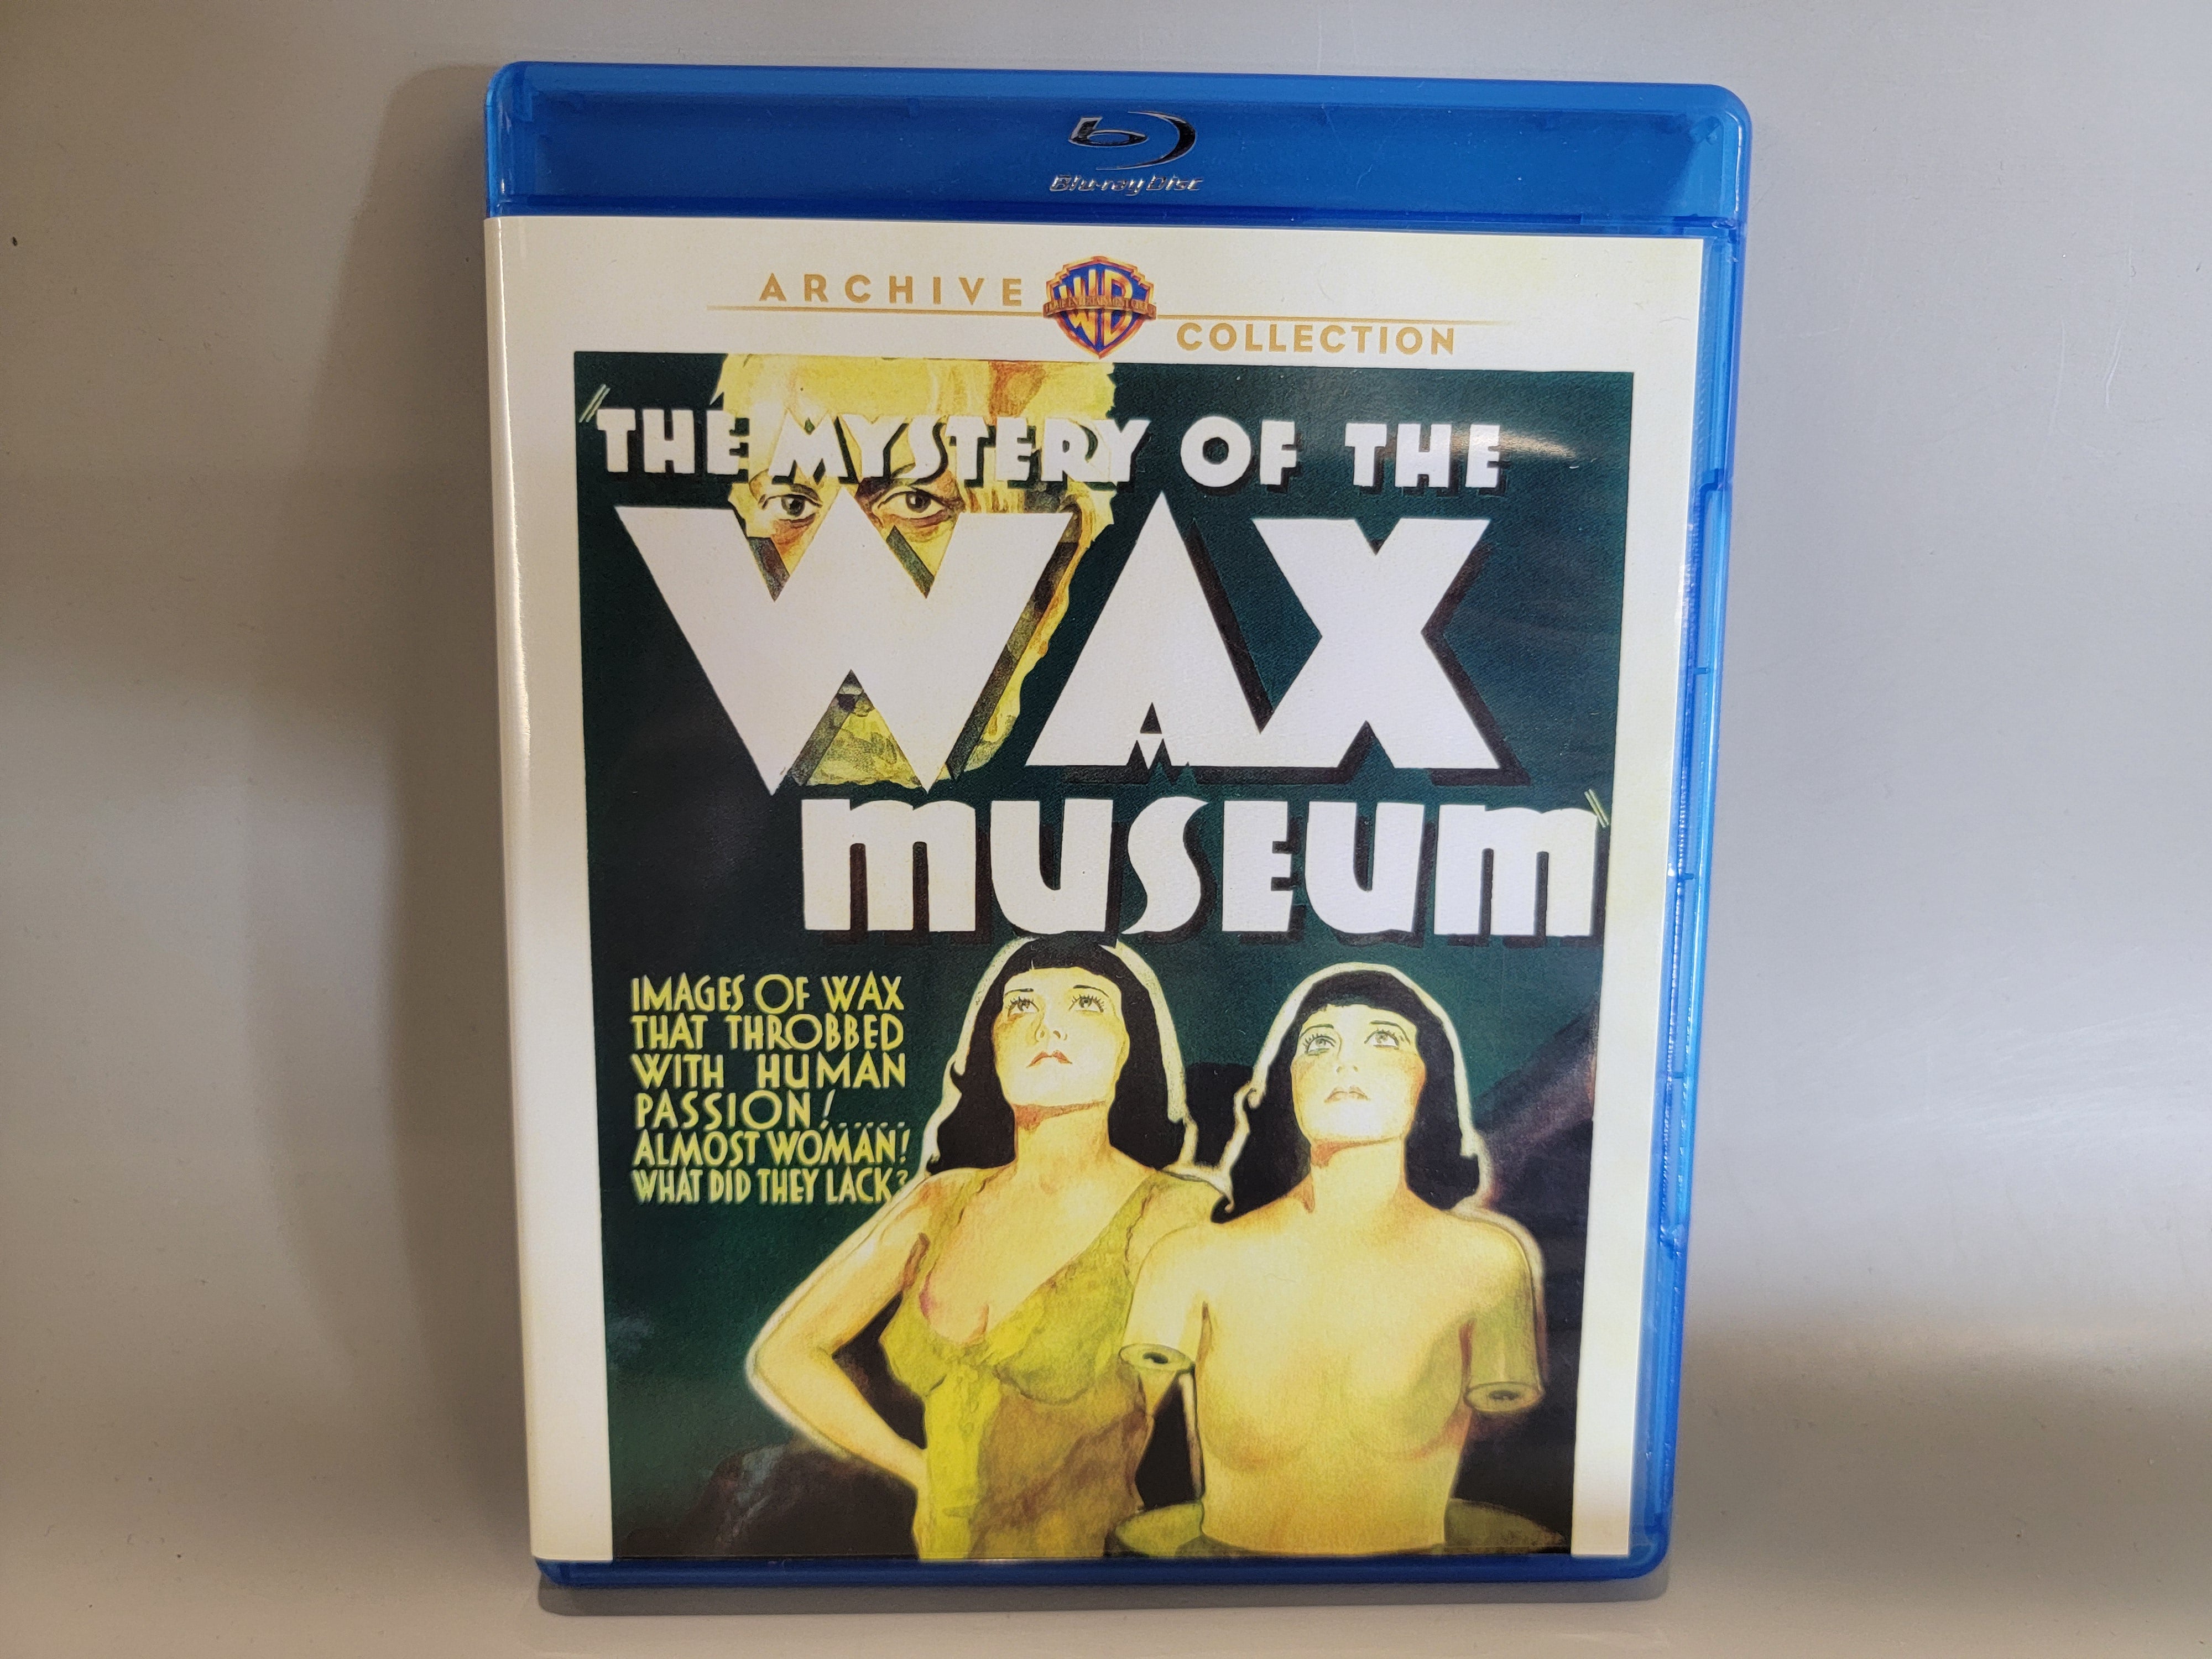 THE MYSTERY OF THE WAX MUSEUM BLU-RAY [USED]